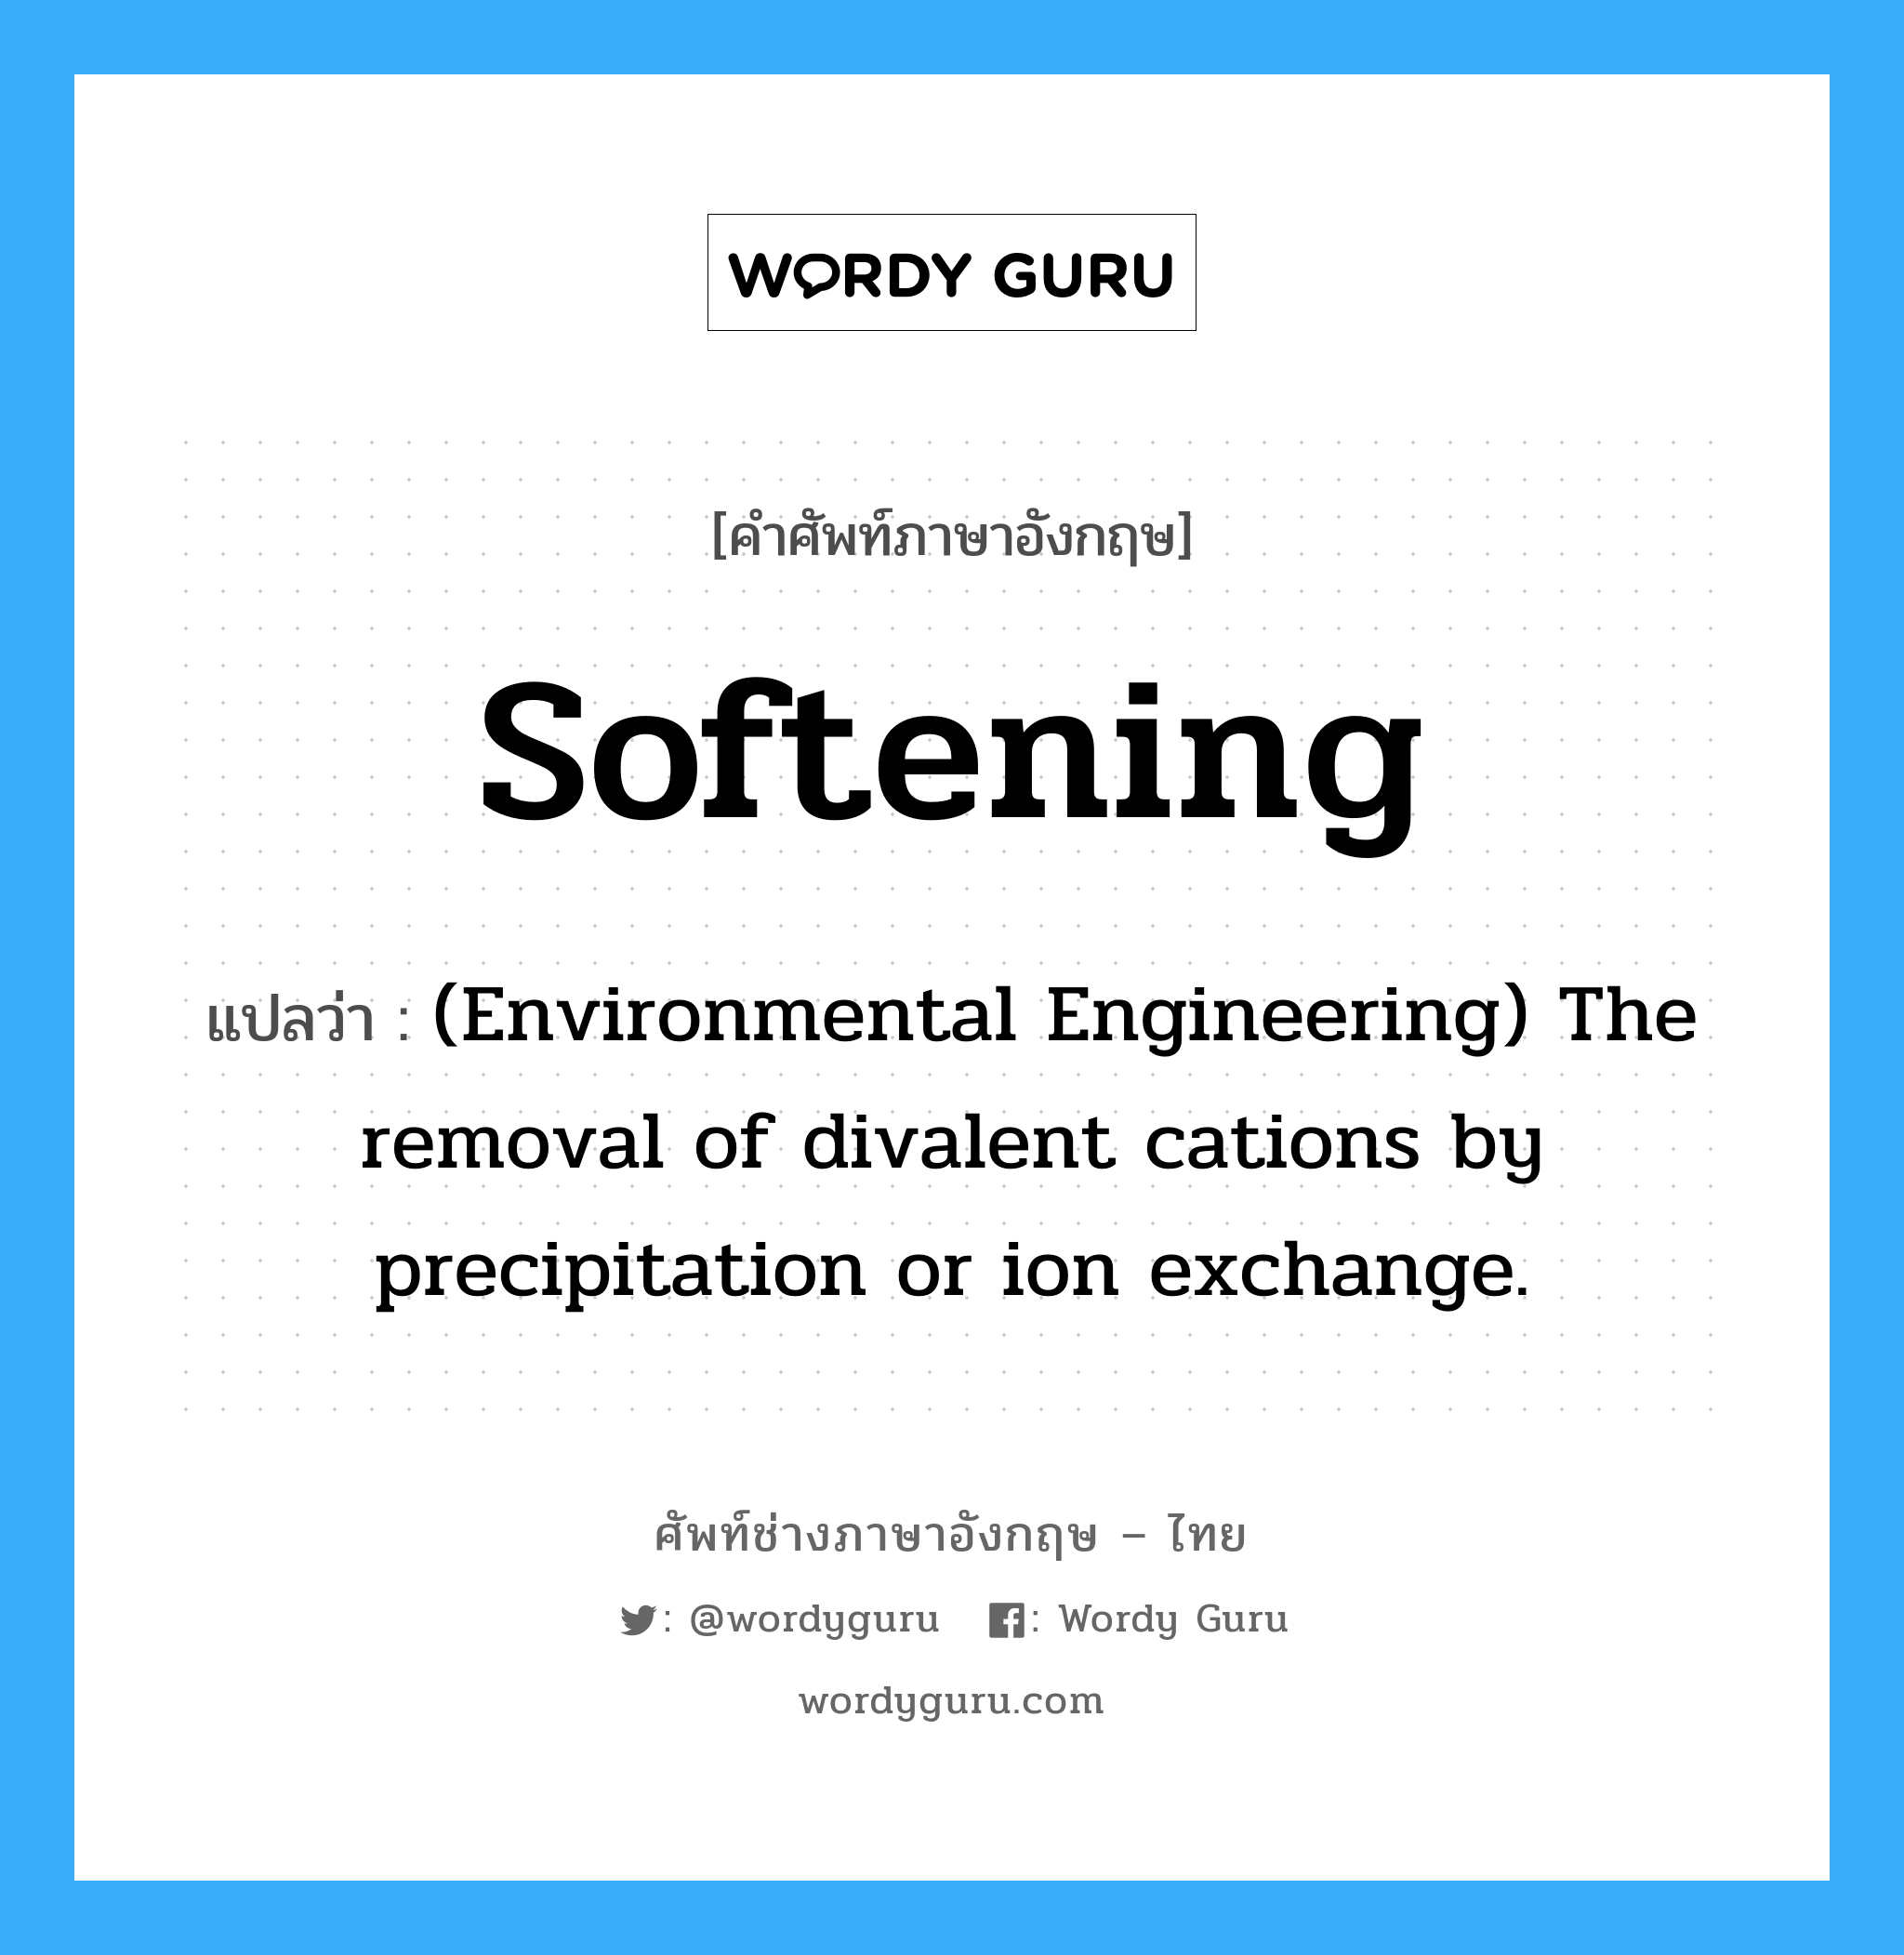 Softening แปลว่า?, คำศัพท์ช่างภาษาอังกฤษ - ไทย Softening คำศัพท์ภาษาอังกฤษ Softening แปลว่า (Environmental Engineering) The removal of divalent cations by precipitation or ion exchange.